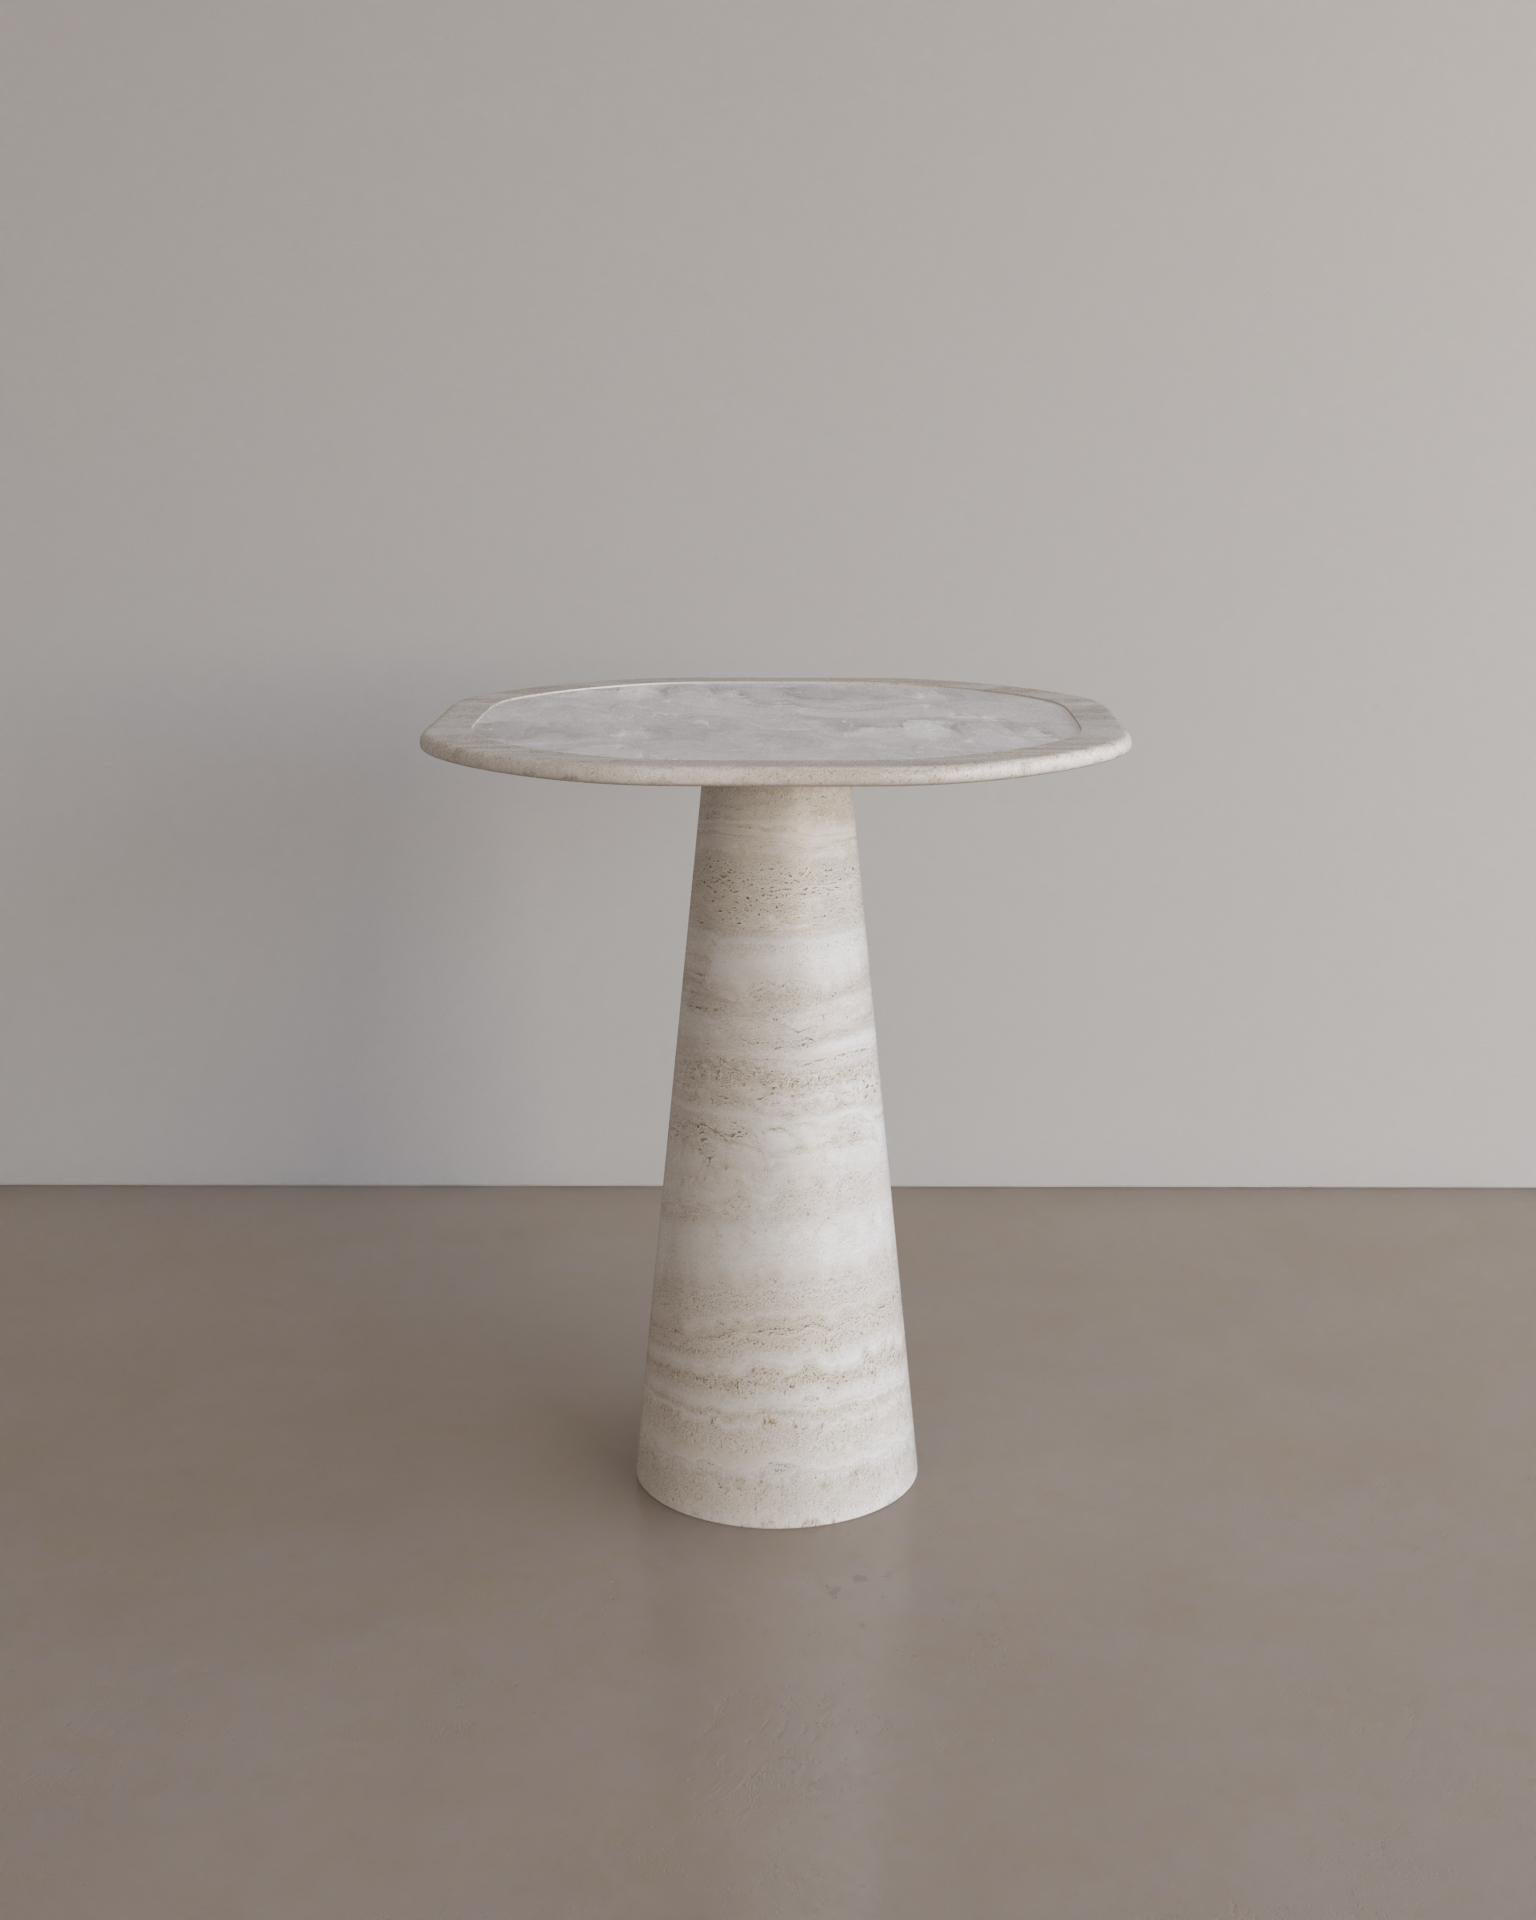 The Eros Foyer Table by The Essentialist, elegantly crafted from Italian Ivory Travertine and adorned with a Bianco Inlay, is an object d'art that strikes an alluring harmony between form and material. Its organic silhouette, graced with the subtle